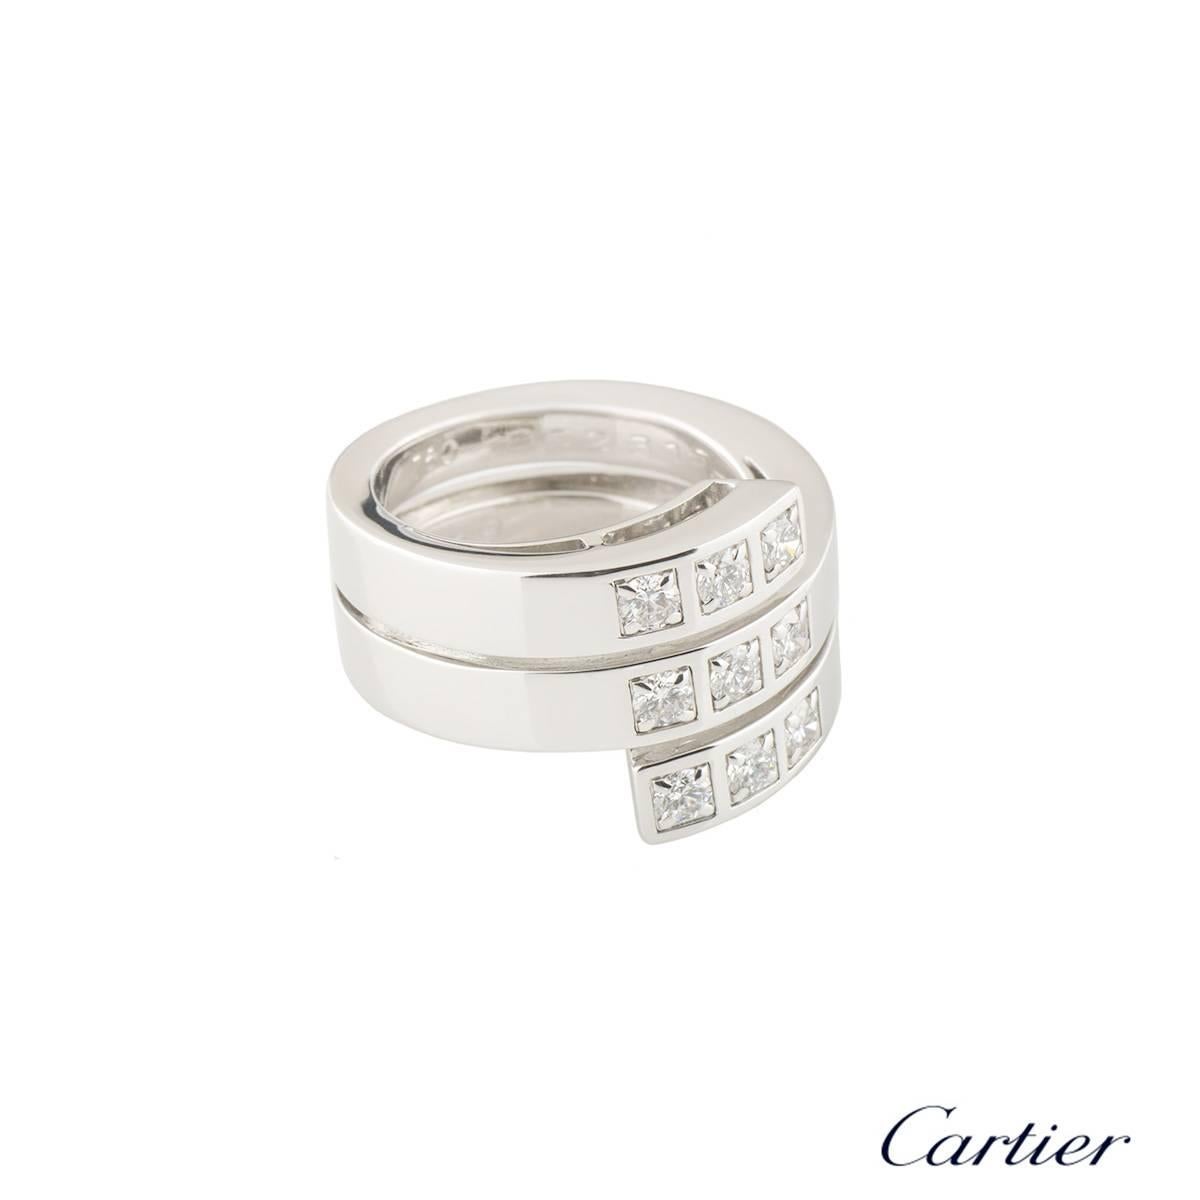 A stylish 18k white gold Cartier diamond dress ring. The ring comprises of a triple spiral band with 3 rows of round brilliant cut diamonds set vertically in the centre. The diamonds have a total weight of approximately 0.63ct F colour and VVS